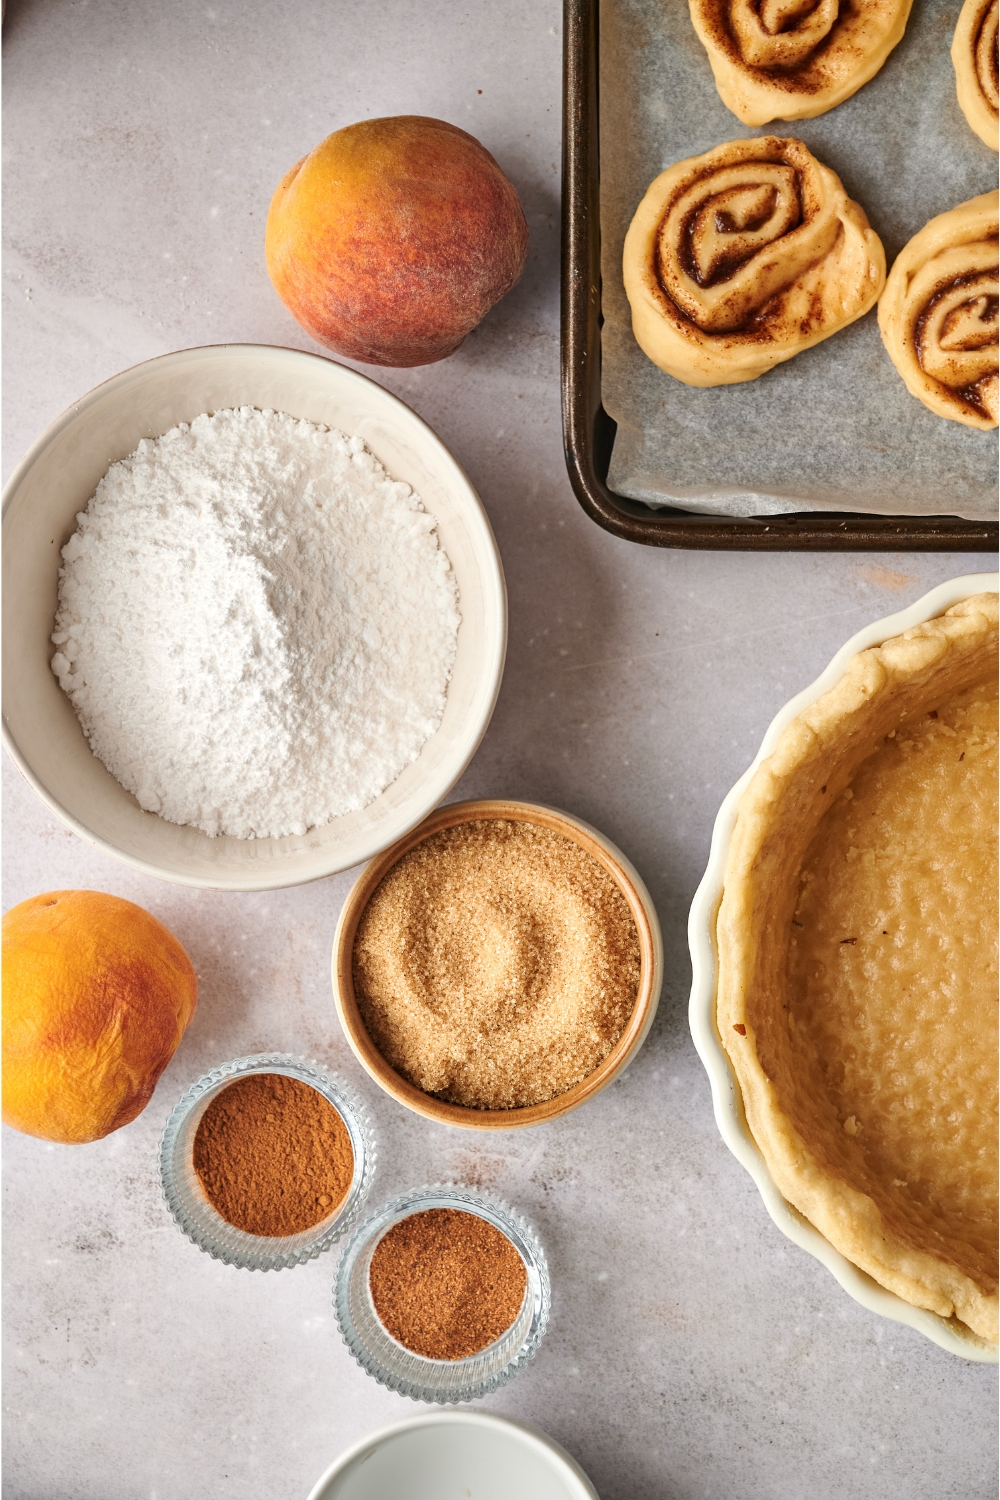 A countertop with multiple containers with brown sugar, cinnamon rolls, peaches, cinnamon, nutmeg, powdered sugar, and puff pastry.